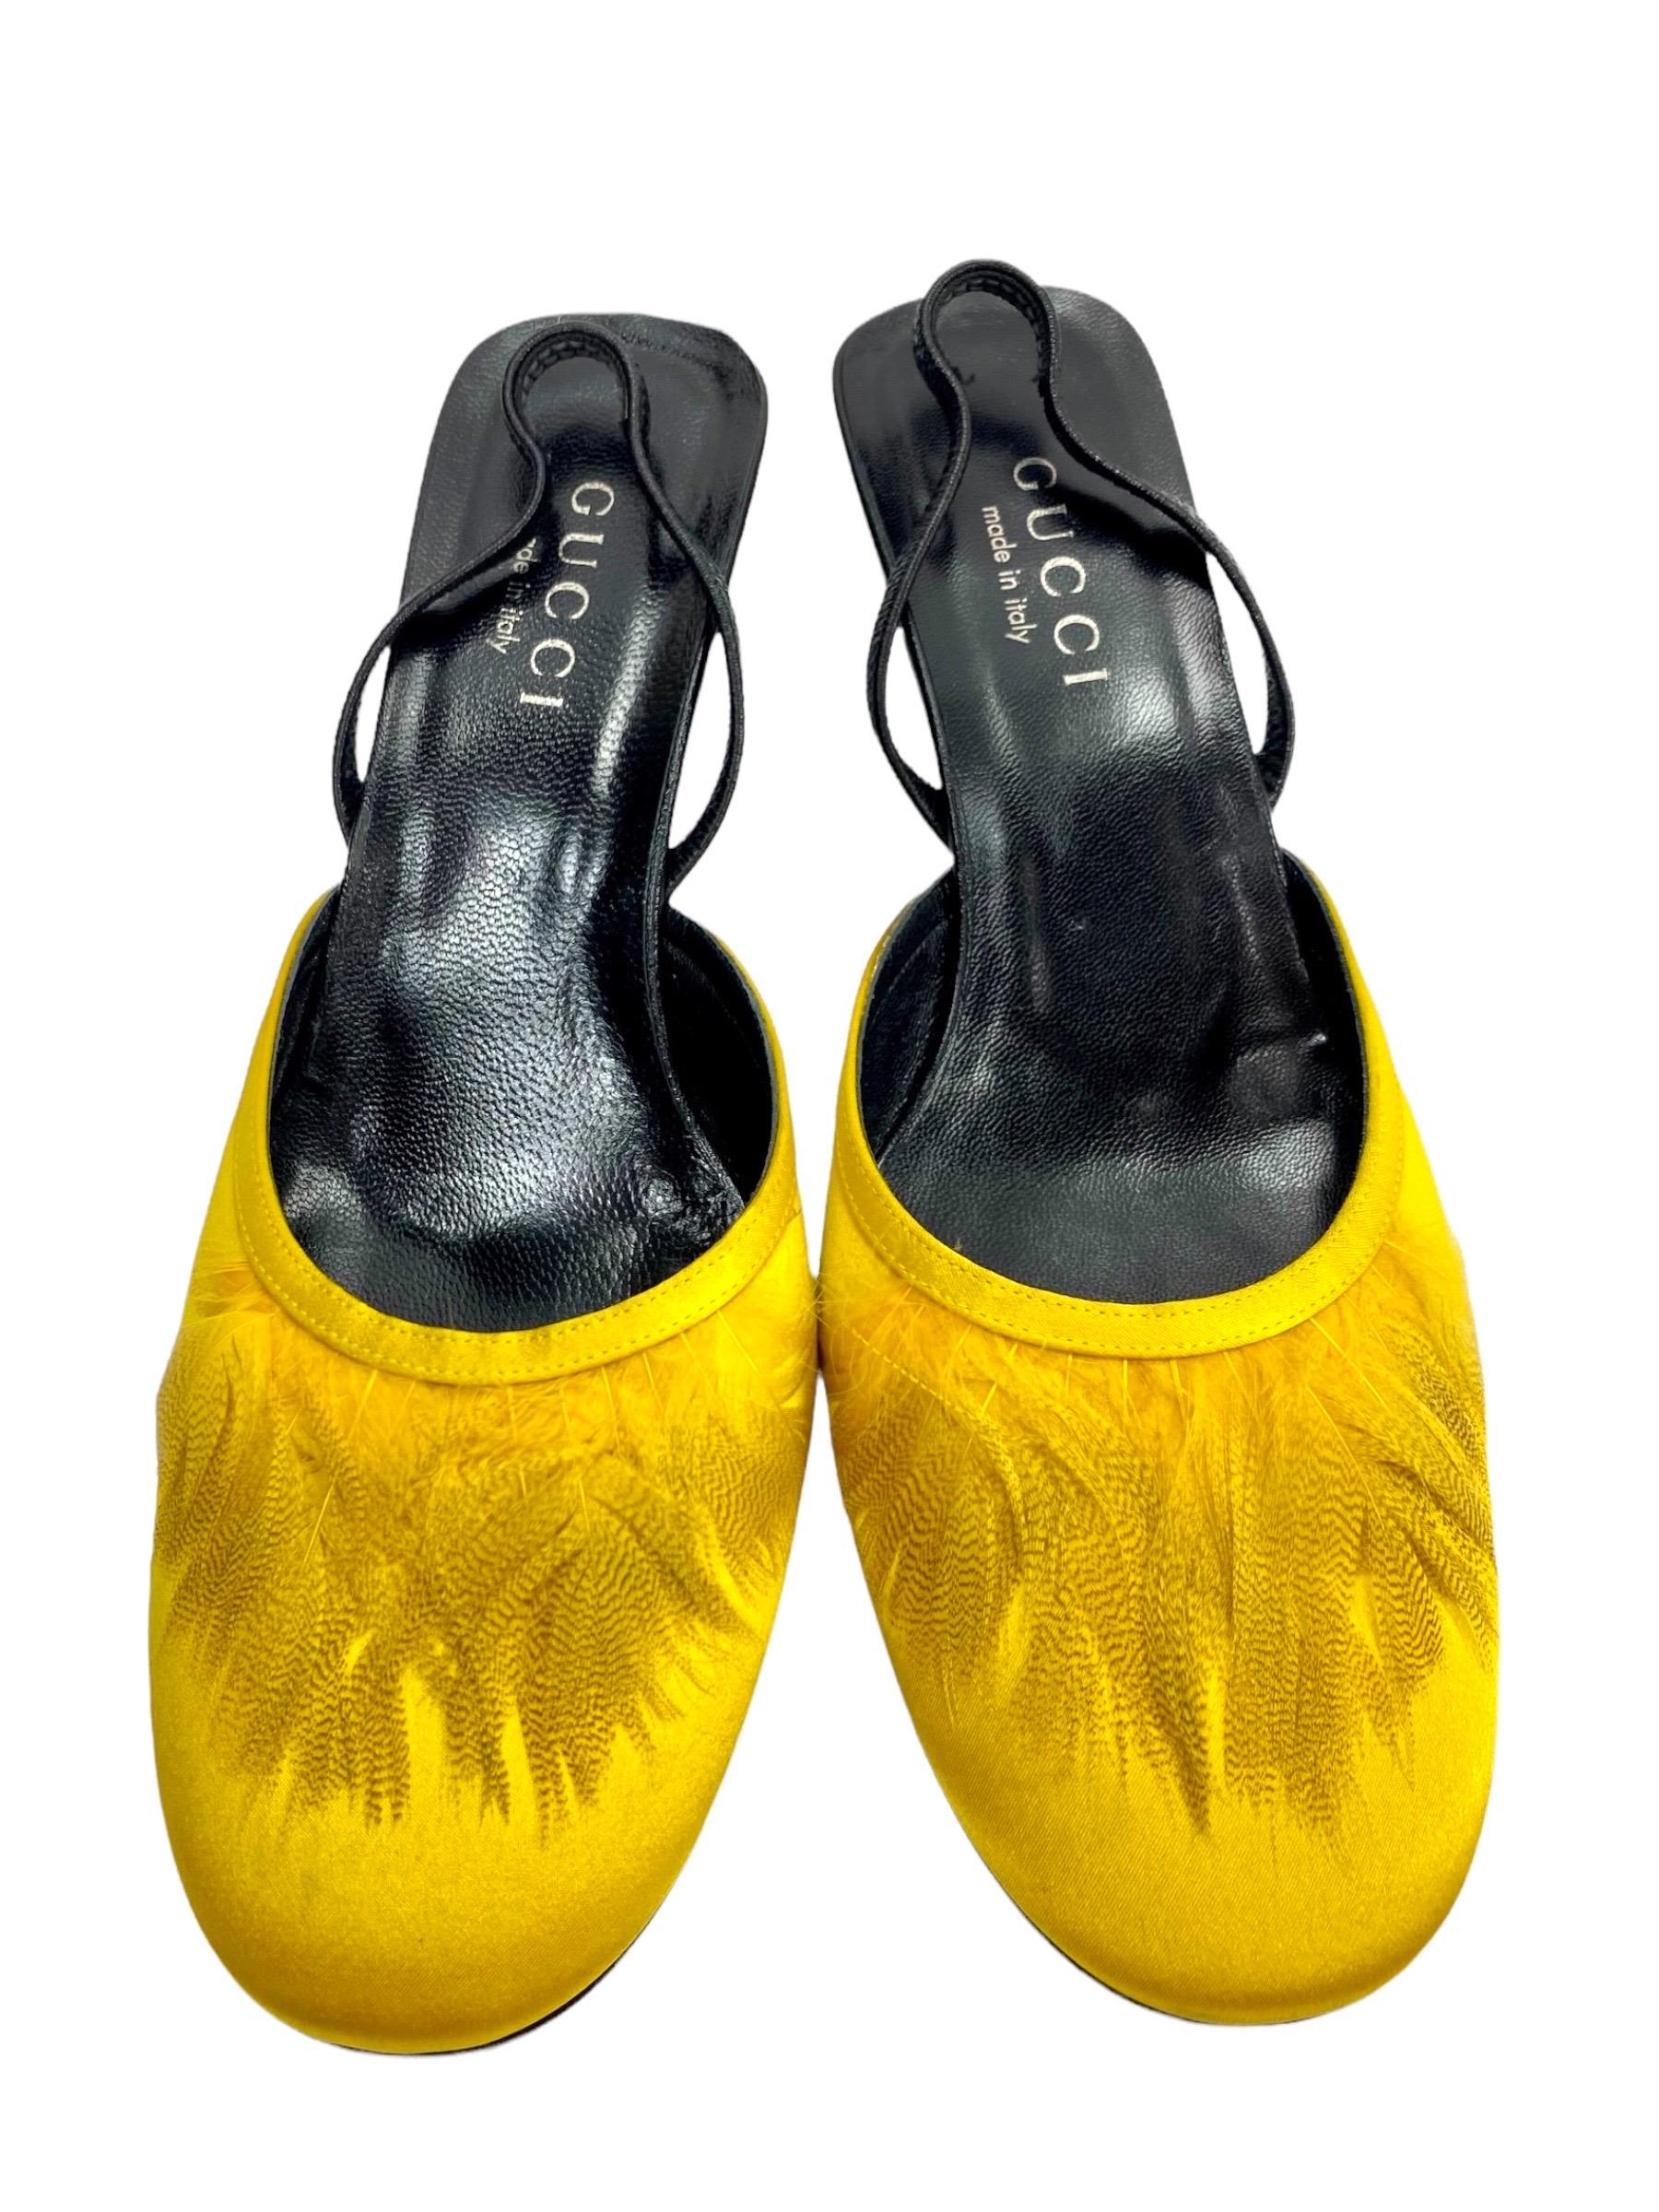 Highly Collectible Pair of shoes from Tom Ford's Era 
S/S 1999 Collection
Size: US - 8 B
Color: Yellow, Crepe Satin, Leather Lining and Sole, Finished with Feathers, Heel measures approx. - 2 inches.
Made in Italy.
Brand new, in excellent condition.